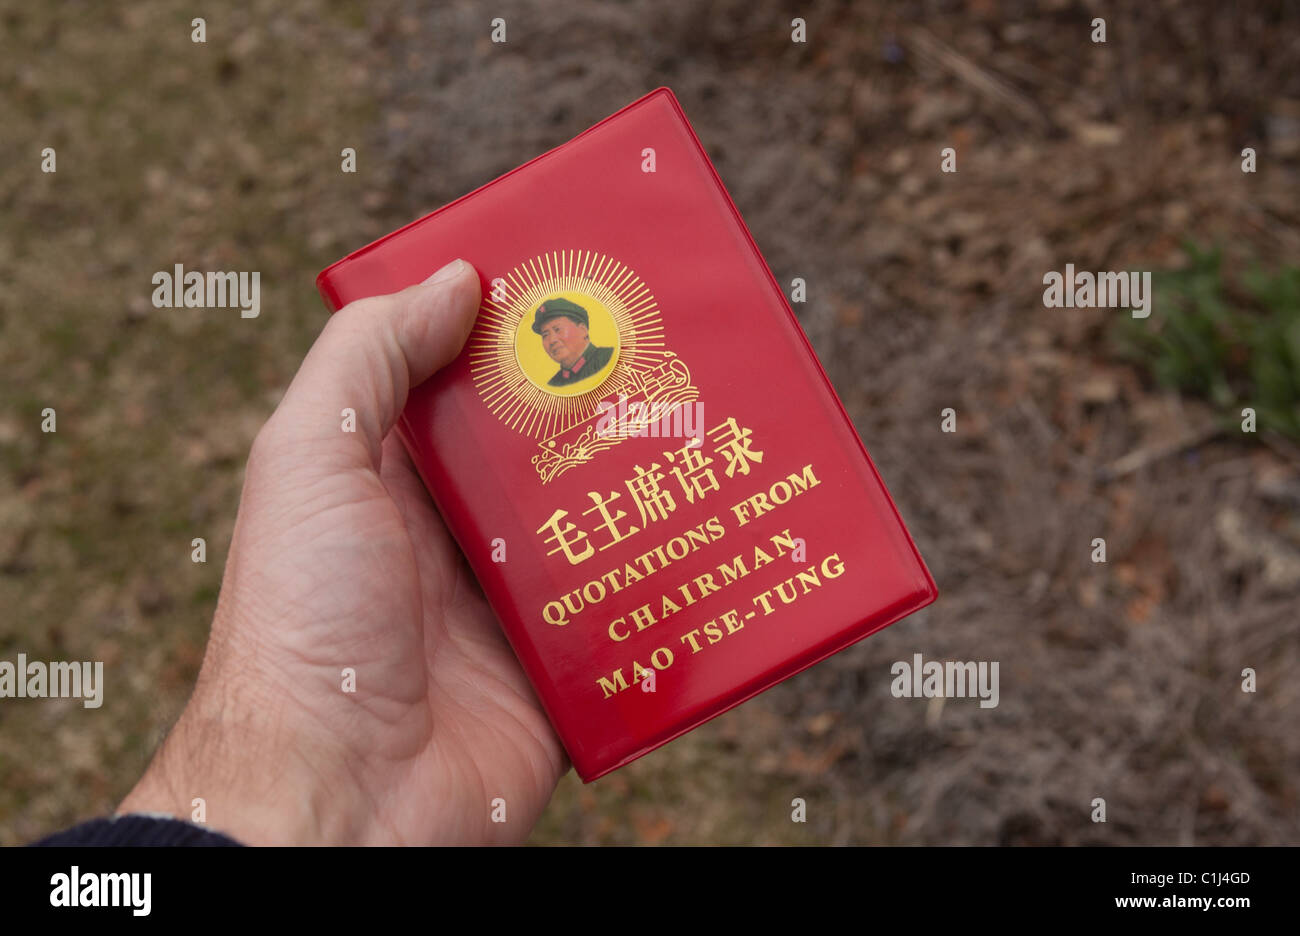 Quotations from Chairman Mao "The Red Book Stock - Alamy